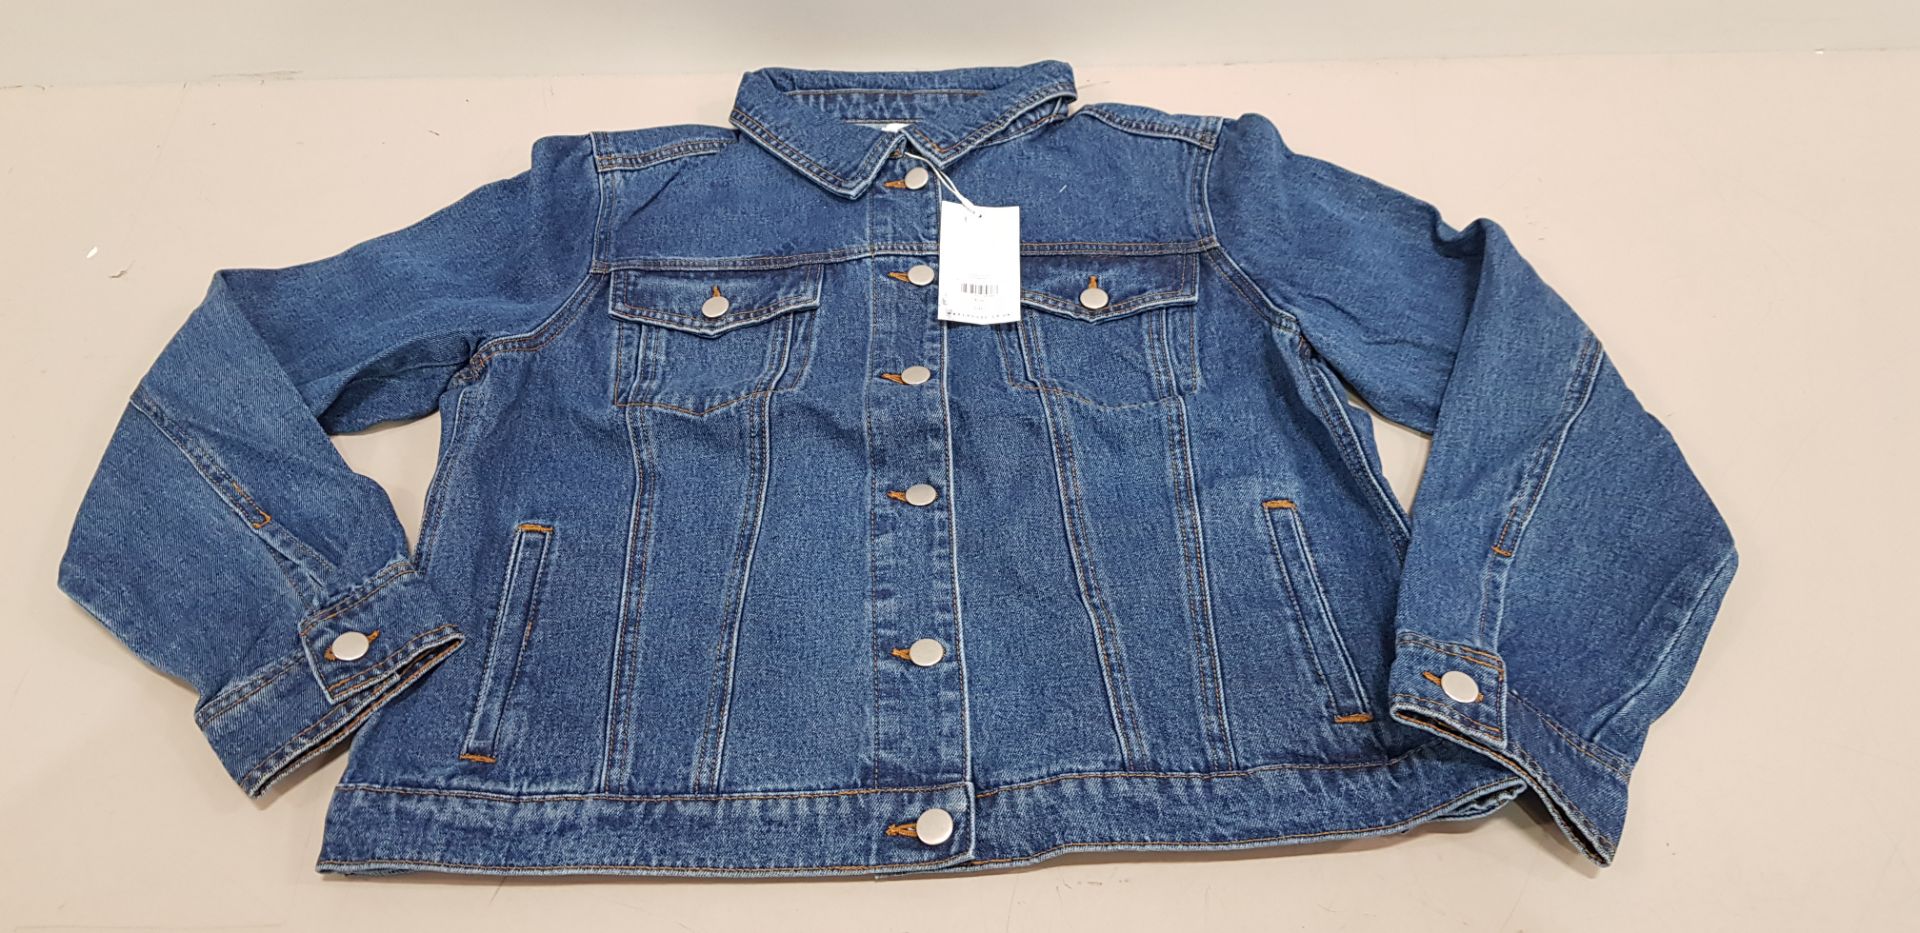 10 X BRAND NEW WAREHOUSE BLUE DENIM JACKETS - ALL IN VARIOUS SIZES ( RRP £ 46.00 PP - TOTAL RRP £